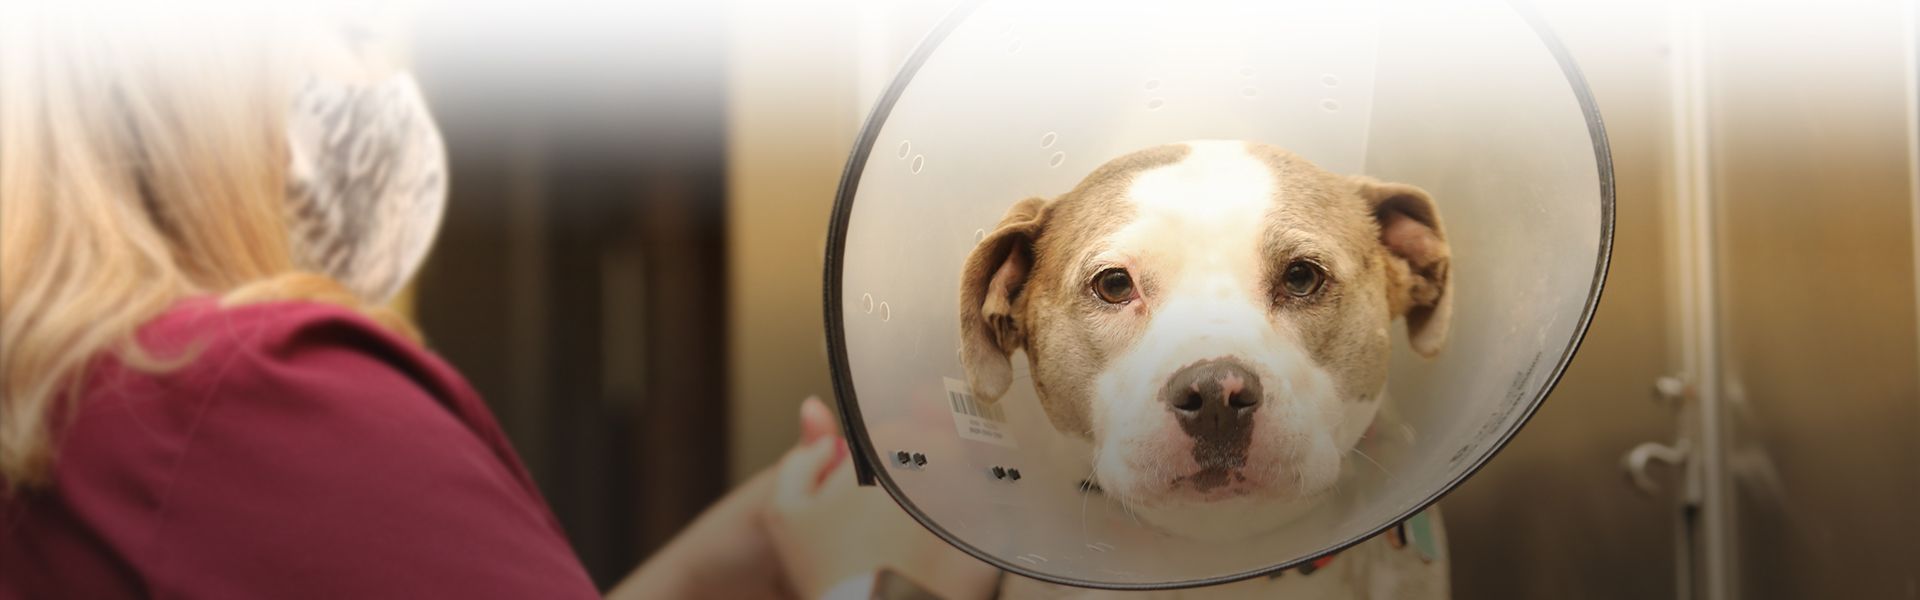 vet tech caring for a pitbull dog after its surgery at city vet veterinary clinic